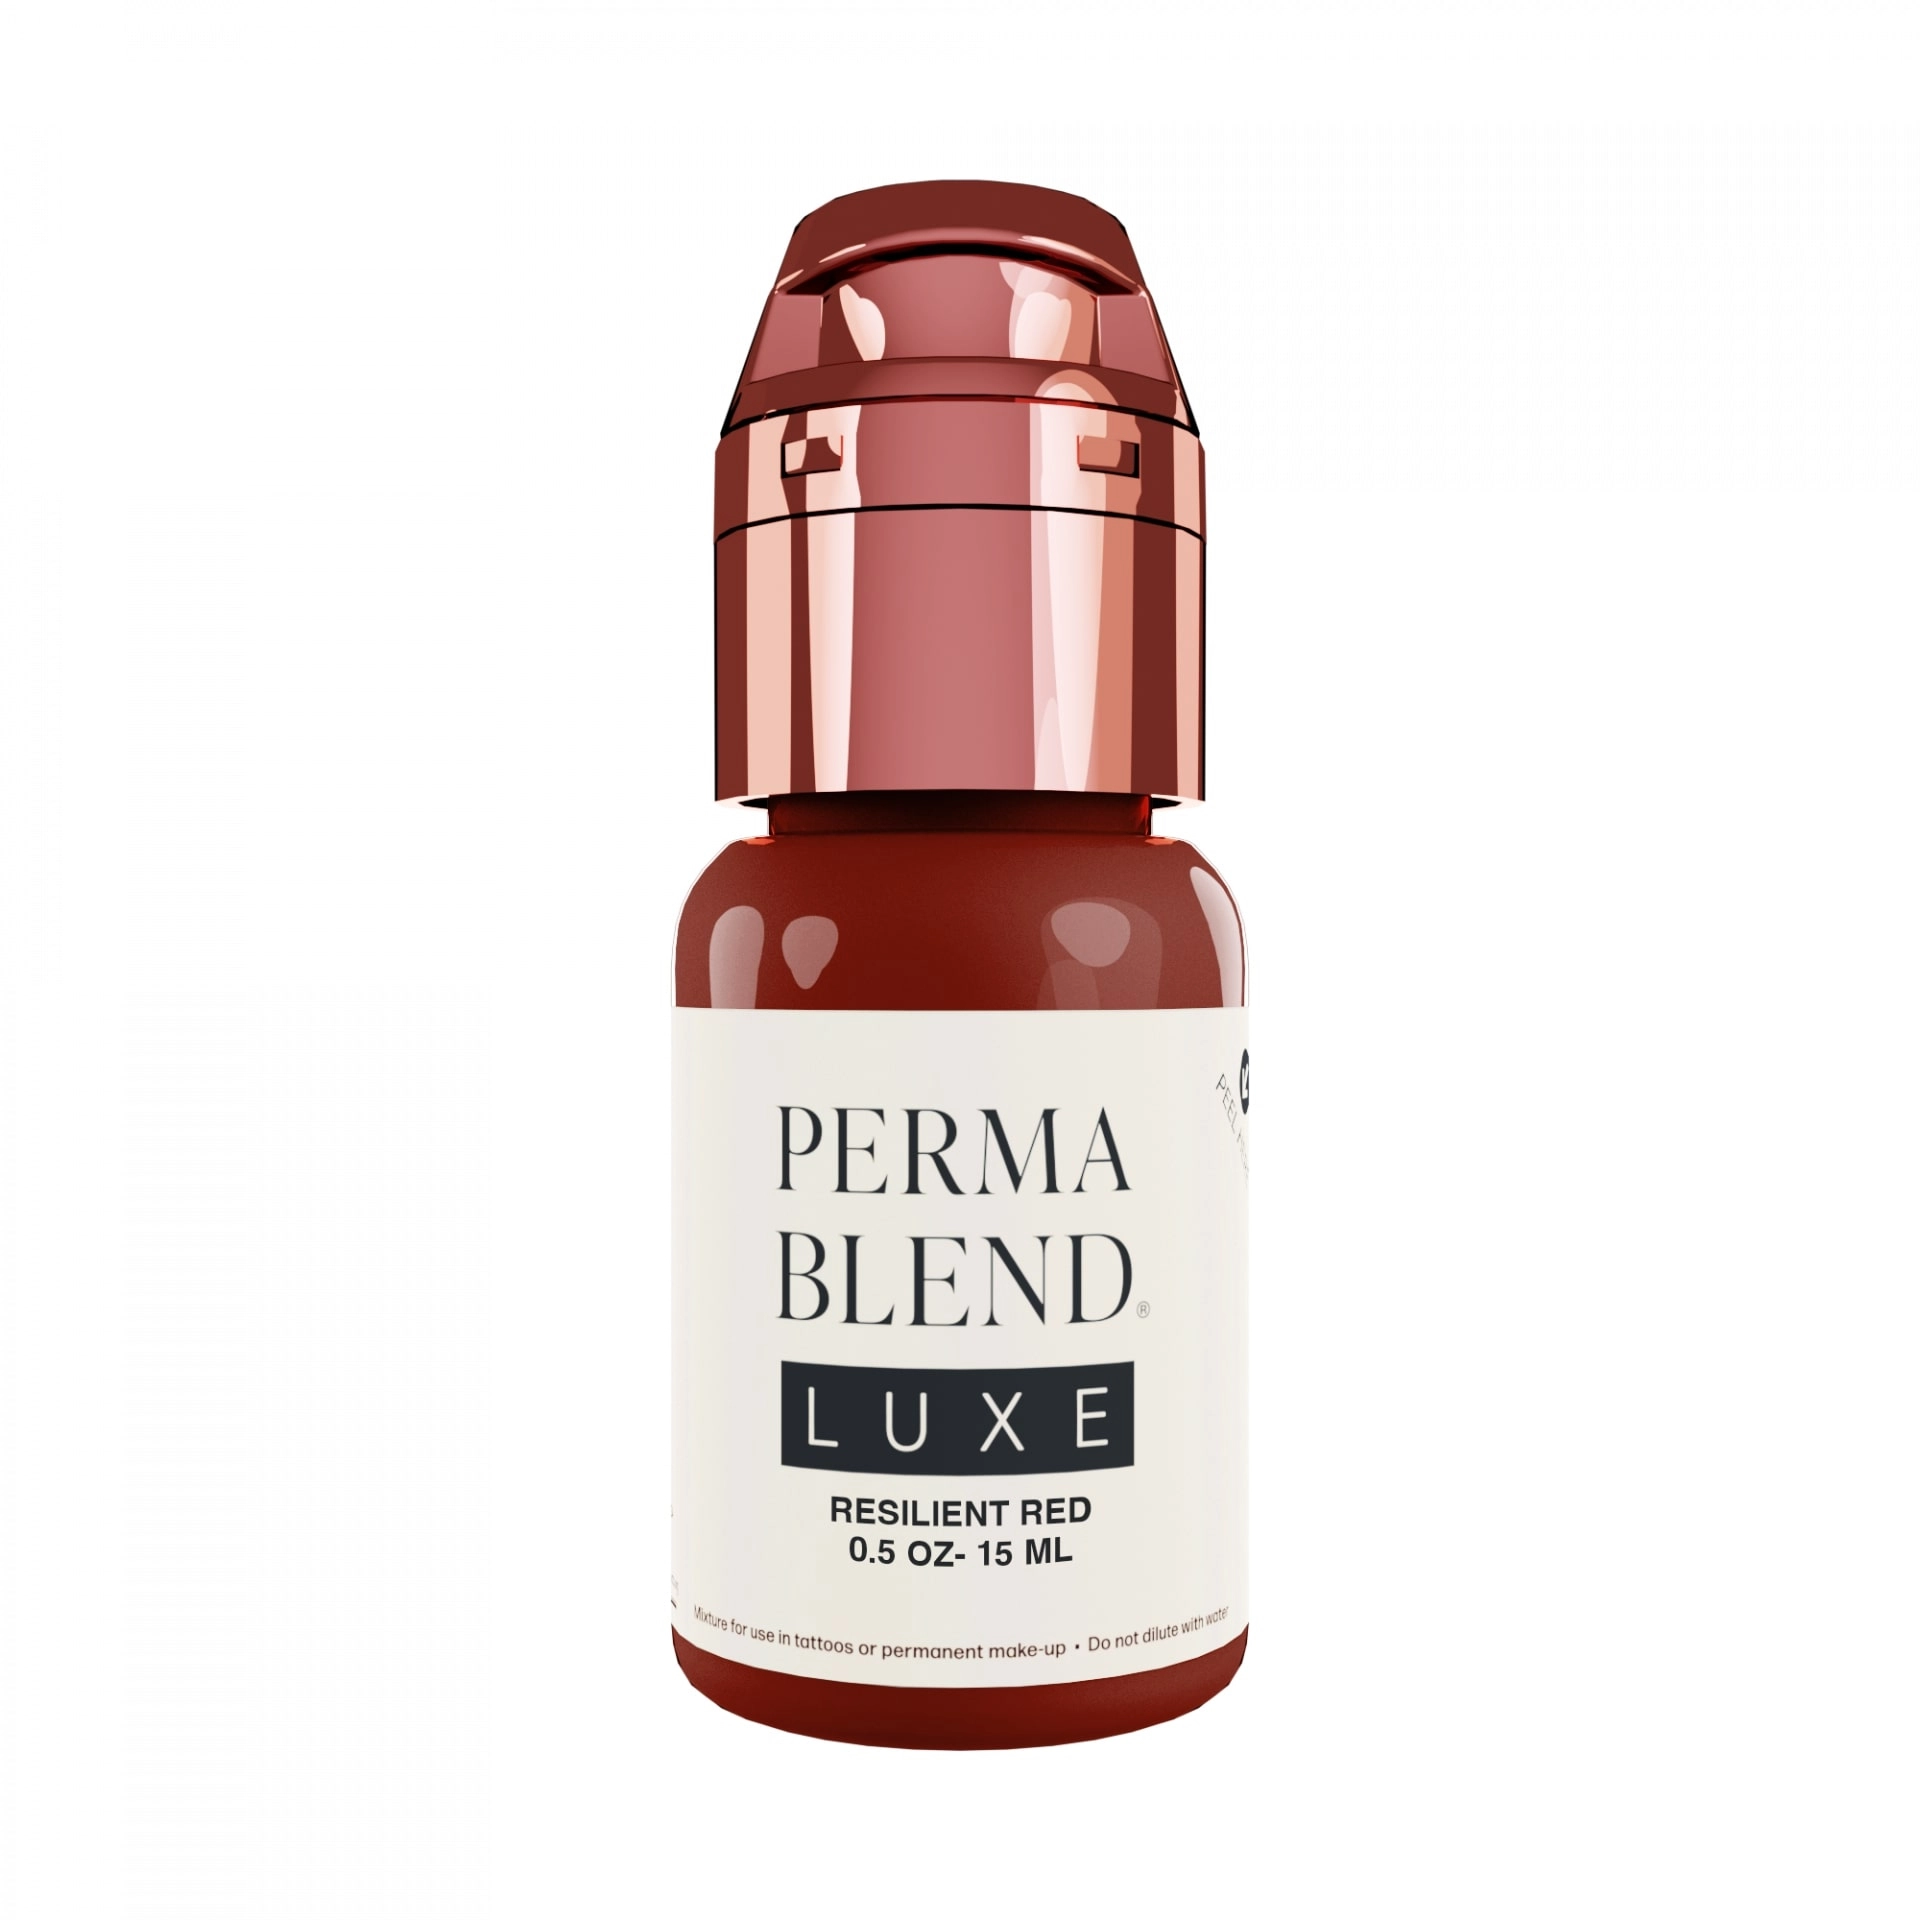 Perma Blend Luxe PMU Pigment - Resilient Red (15 ml)